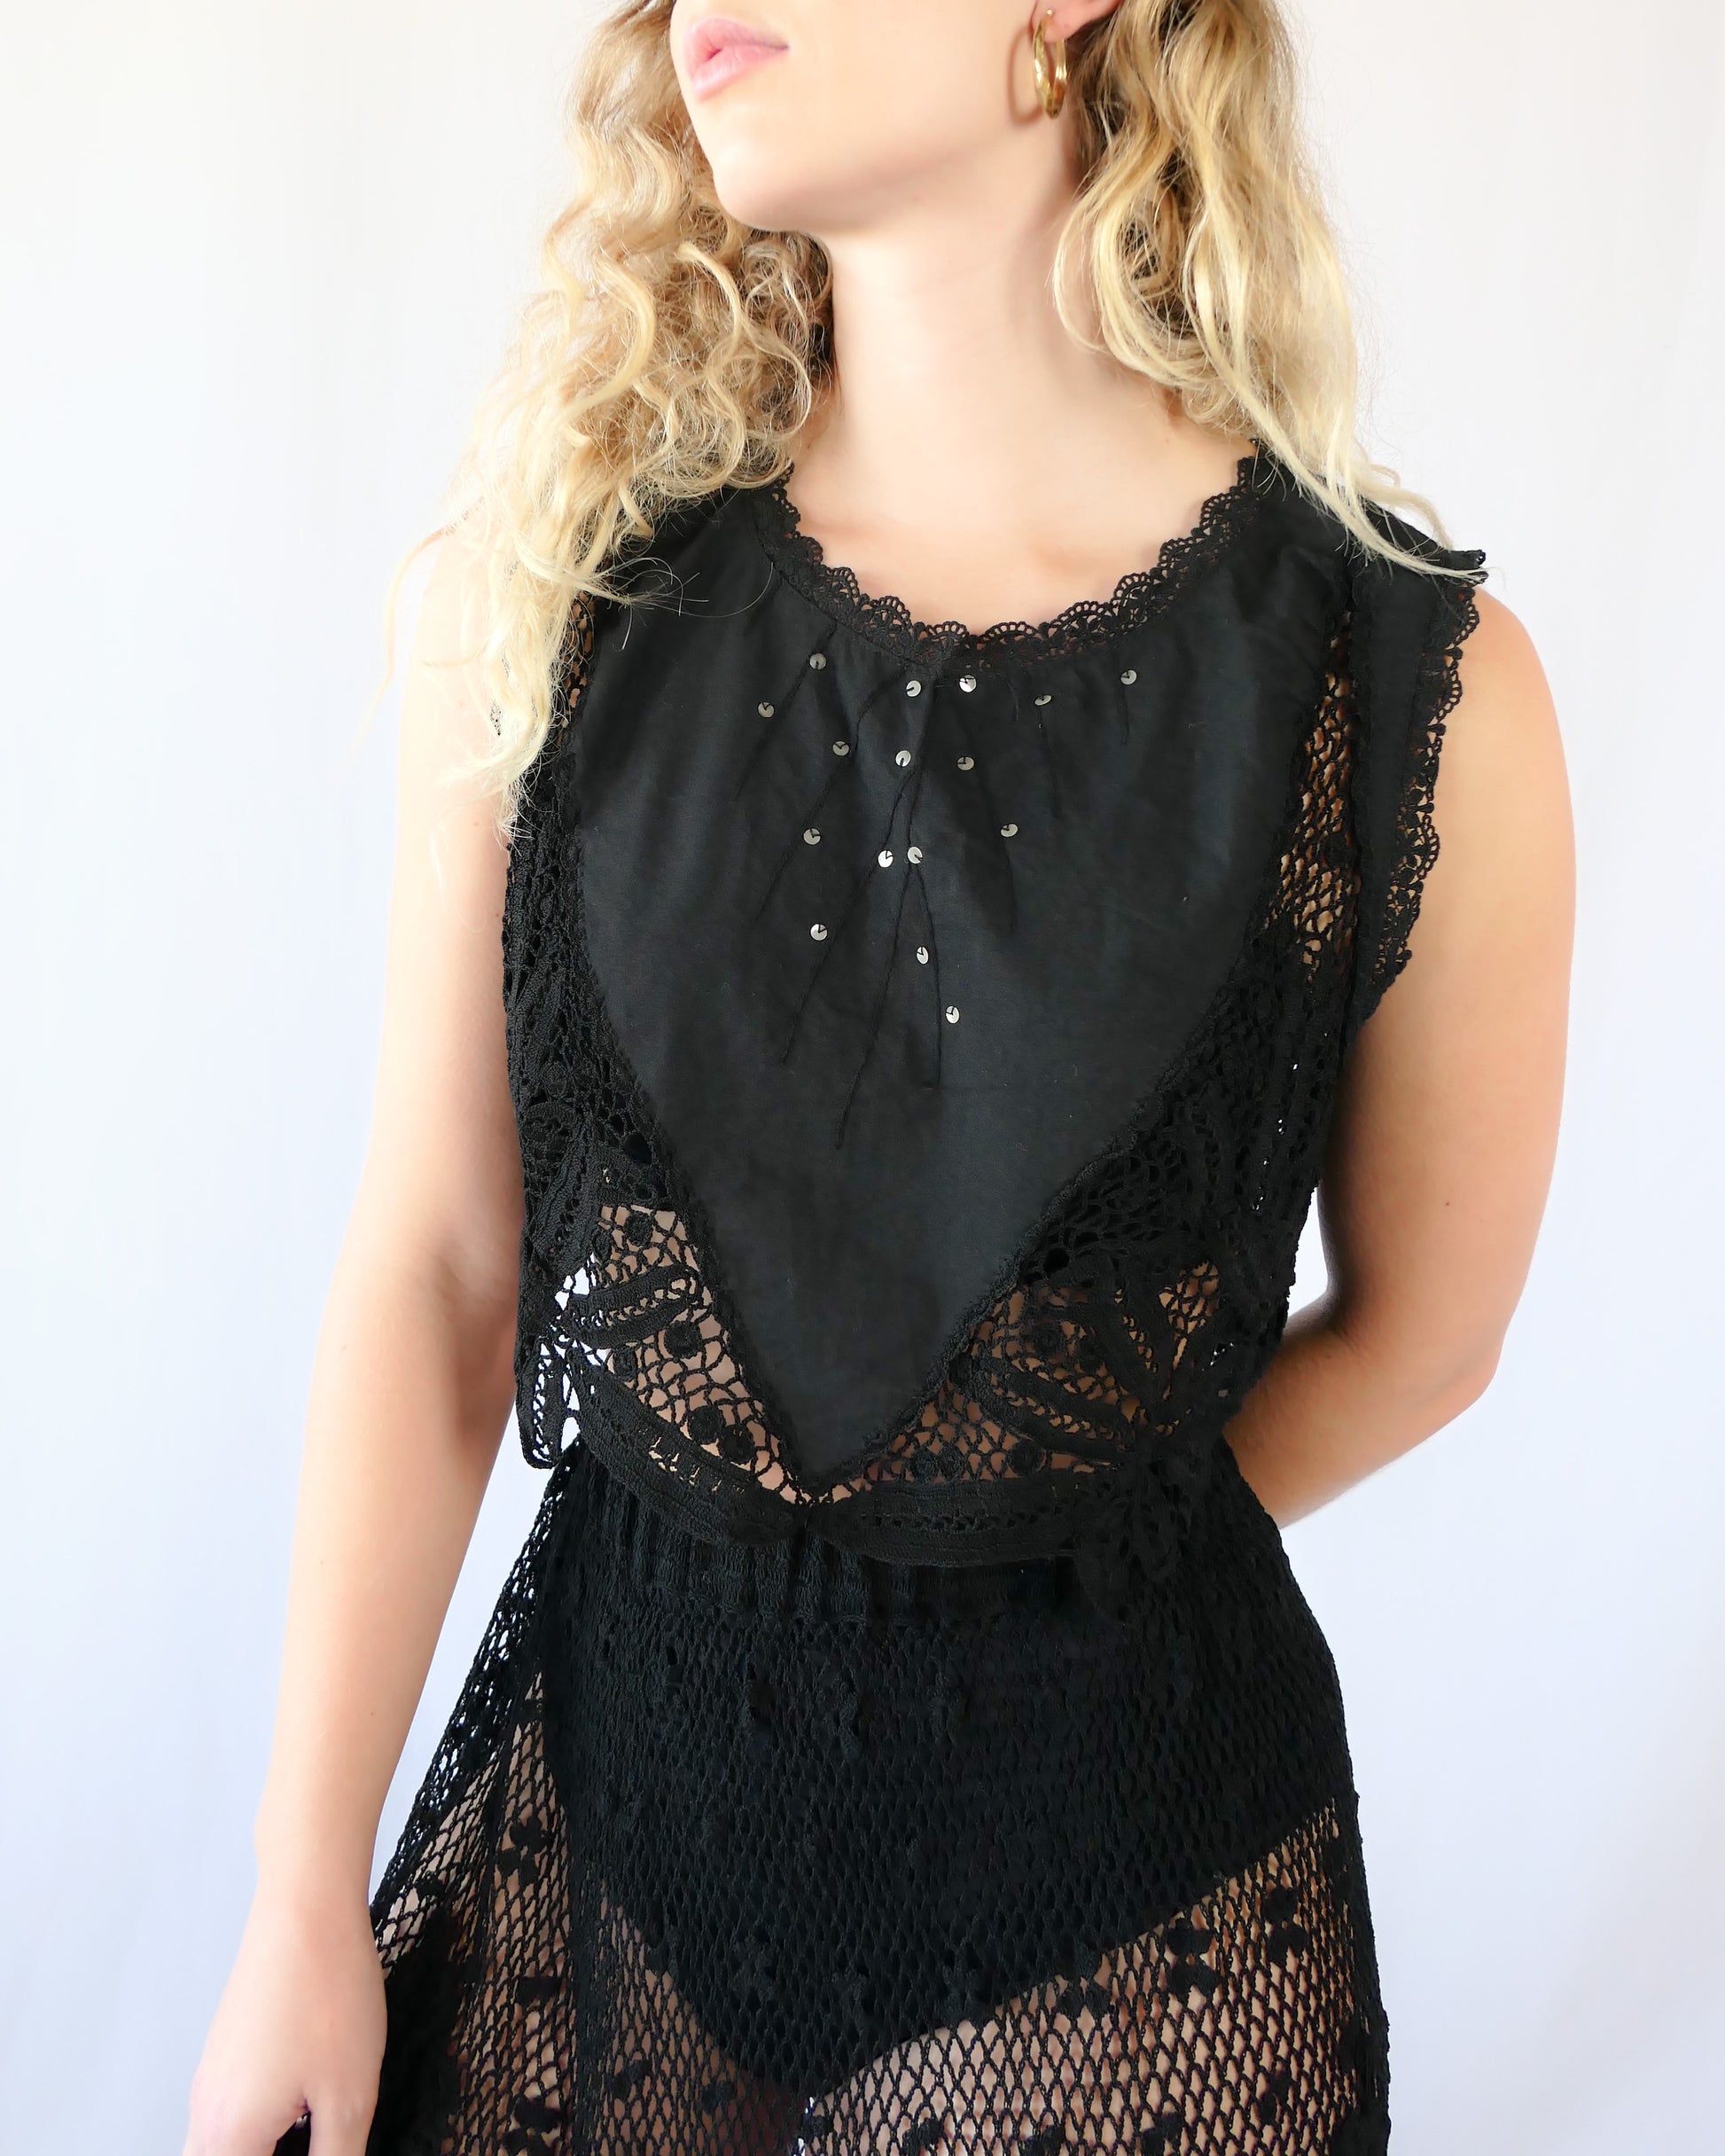 Rock on with this seductive black tank crop top made of vintage fabric with embroidered detail, sequins, and beautiful hand crochet work. Wear it together with one of our Lim's Vintage black crochet maxi length skirts for a festive goth vibe, or pair it with a black skirt or jeans and boots or sandals for a more casual look.  Measurements:  Bust 37” Waist 36" Length 15” Size: Small to Medium  Color: Black  Material: 100% cotton